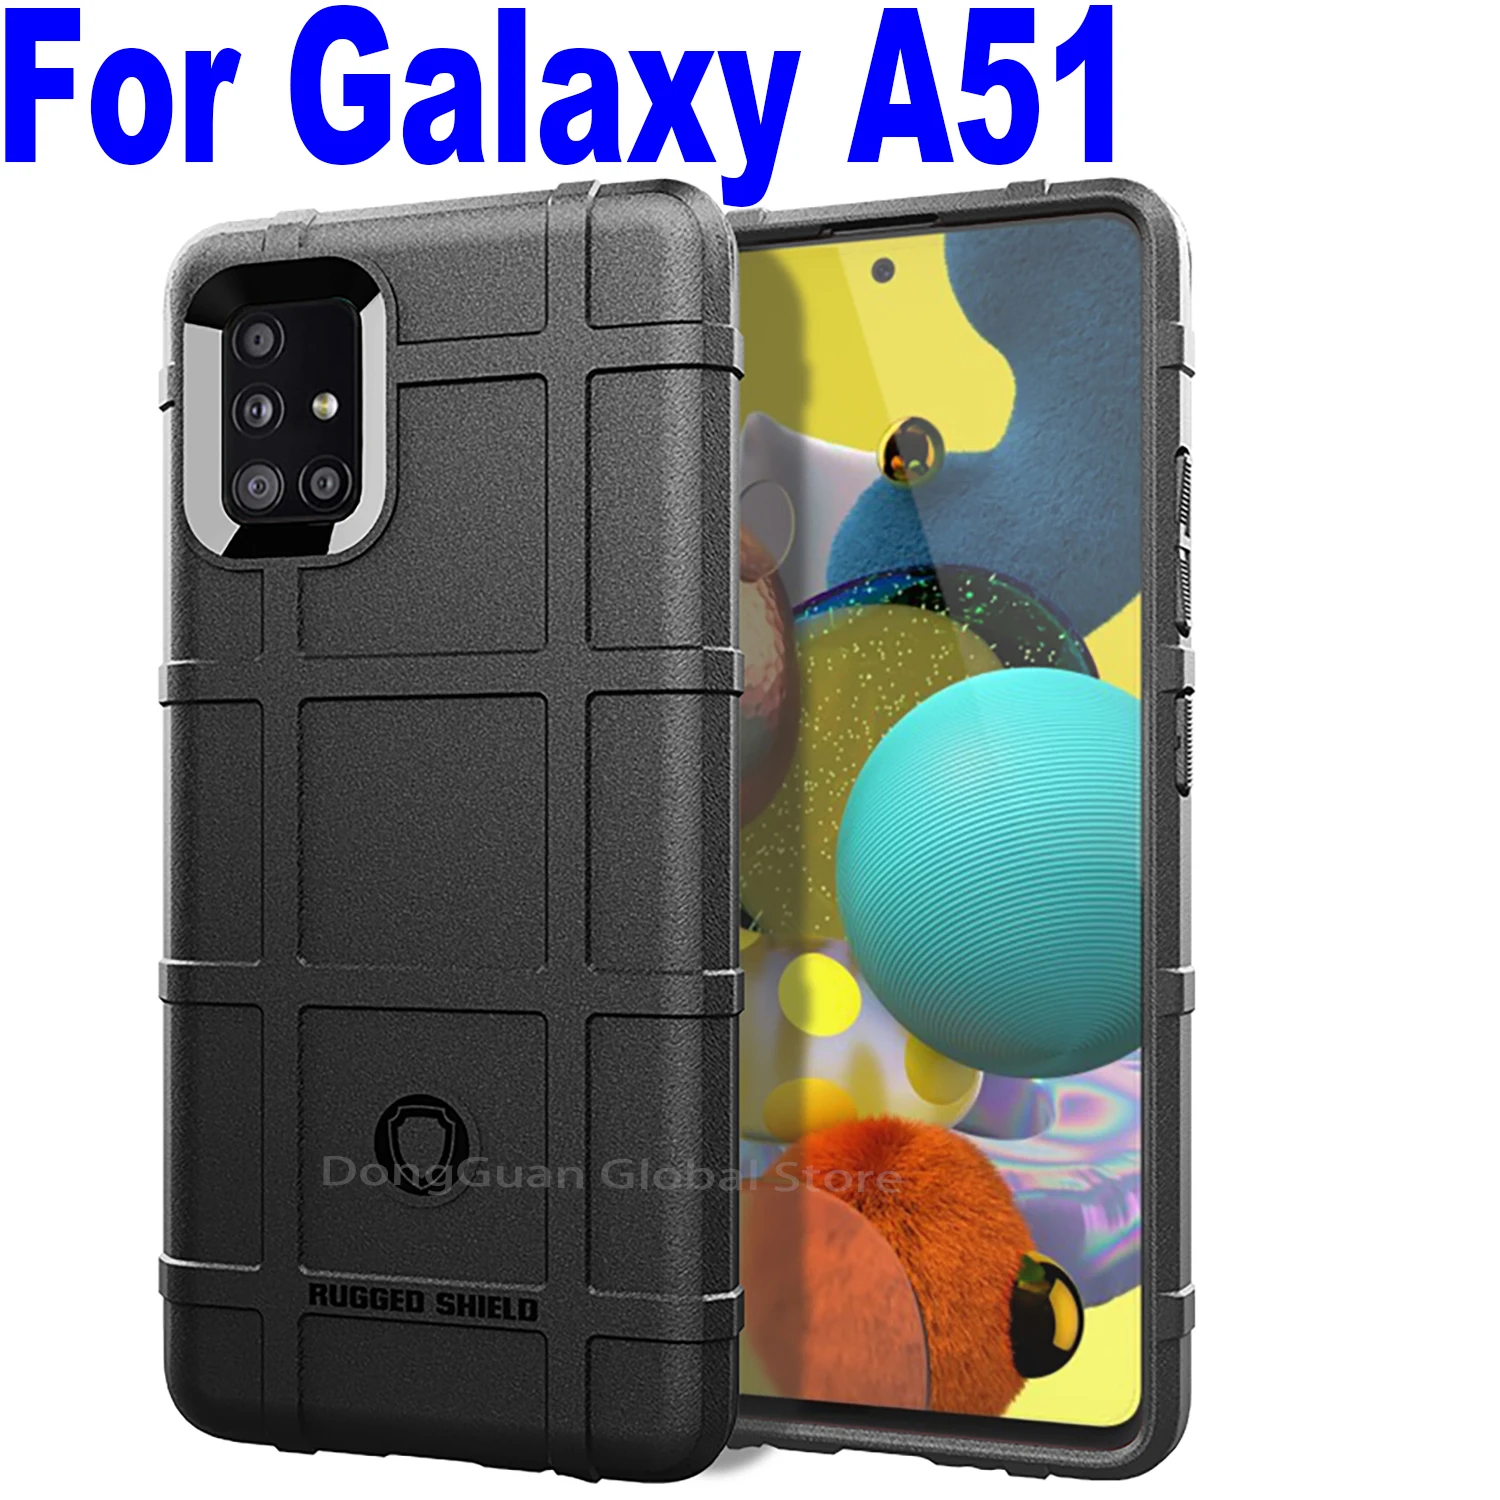 

Rugged Shield Shockproof Armor Case For Samsung Galaxy A51 5G SM-A515 SM-A516 Cover Shell Case